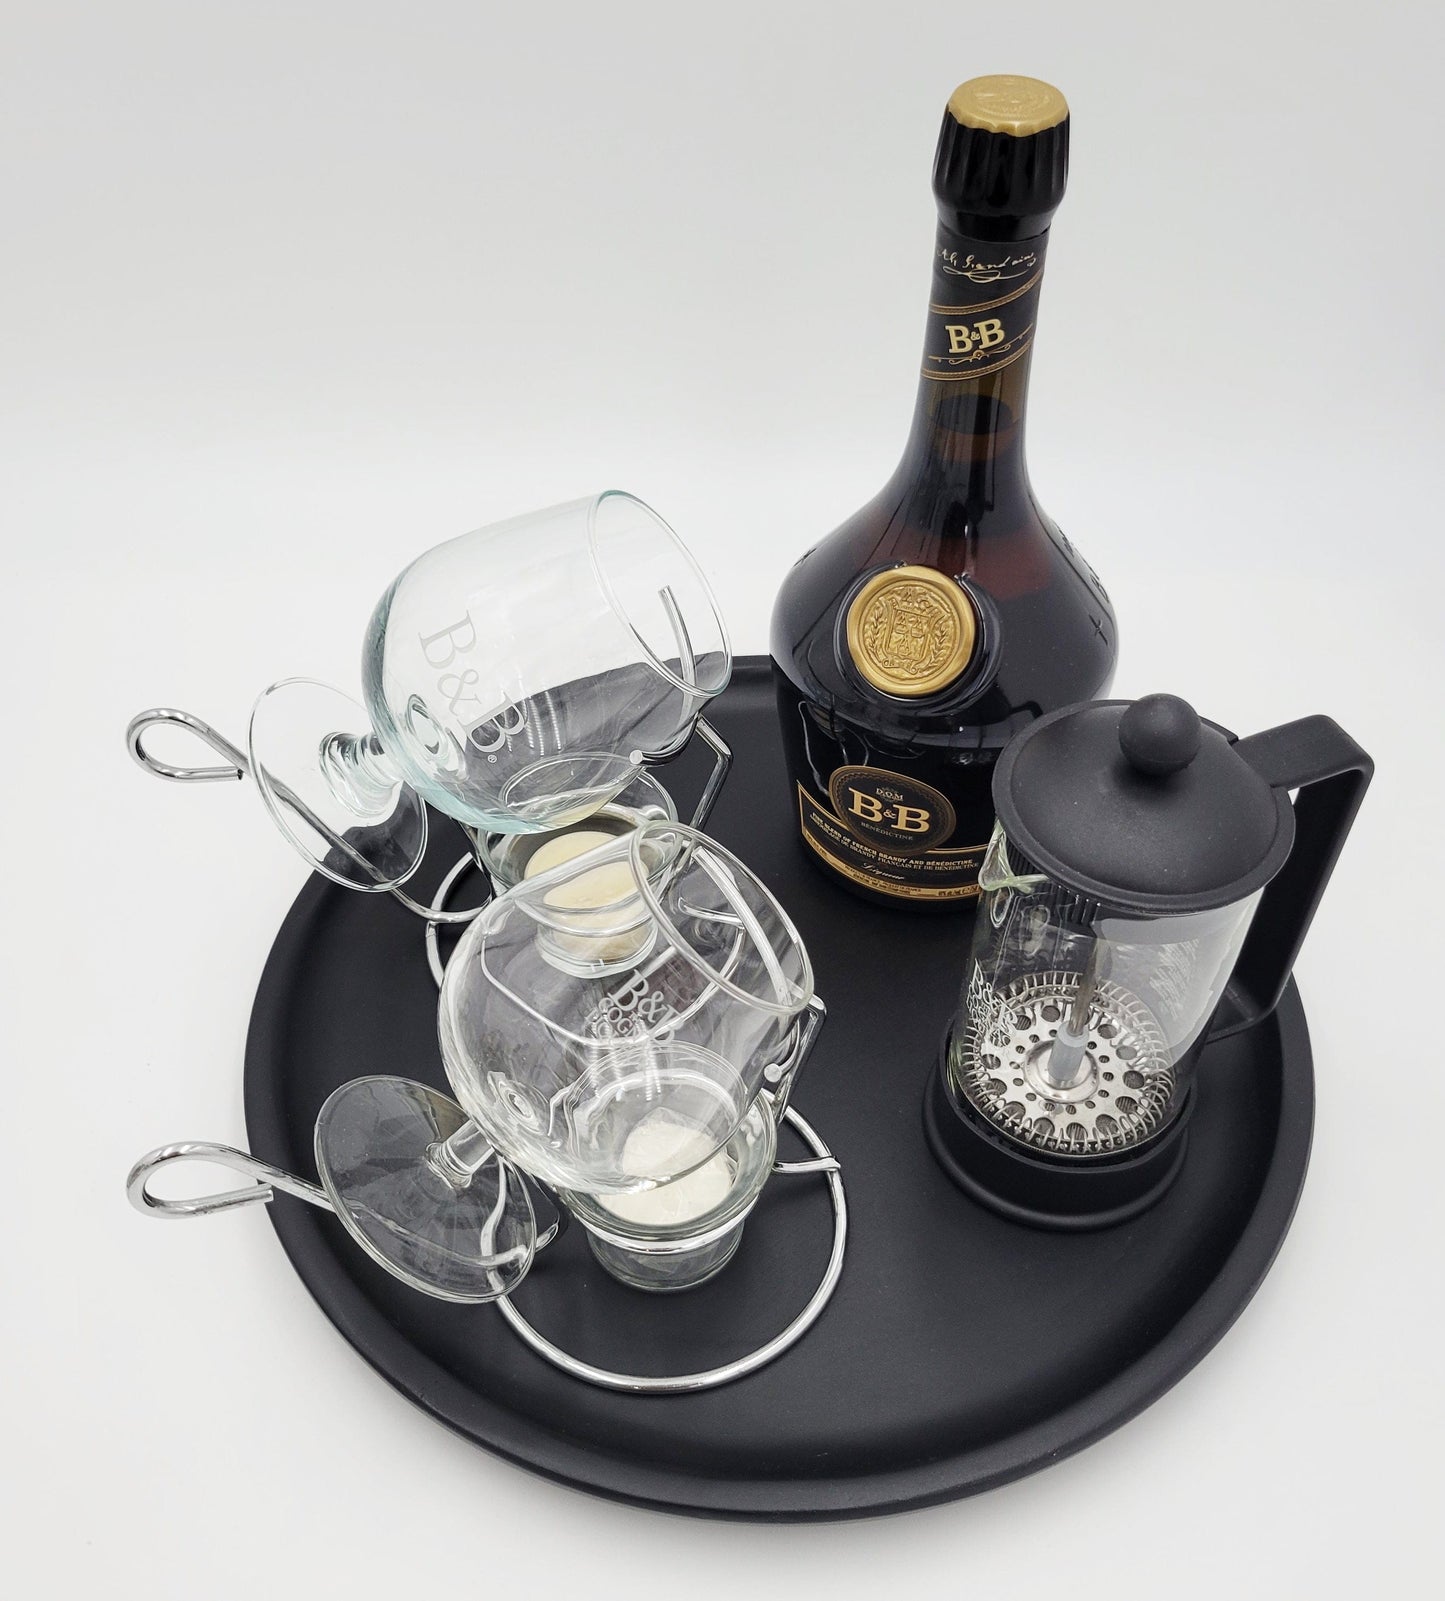 B&B Barware B&B Cognac Set with 2 Snifters on Stands w/ French Coffee Press